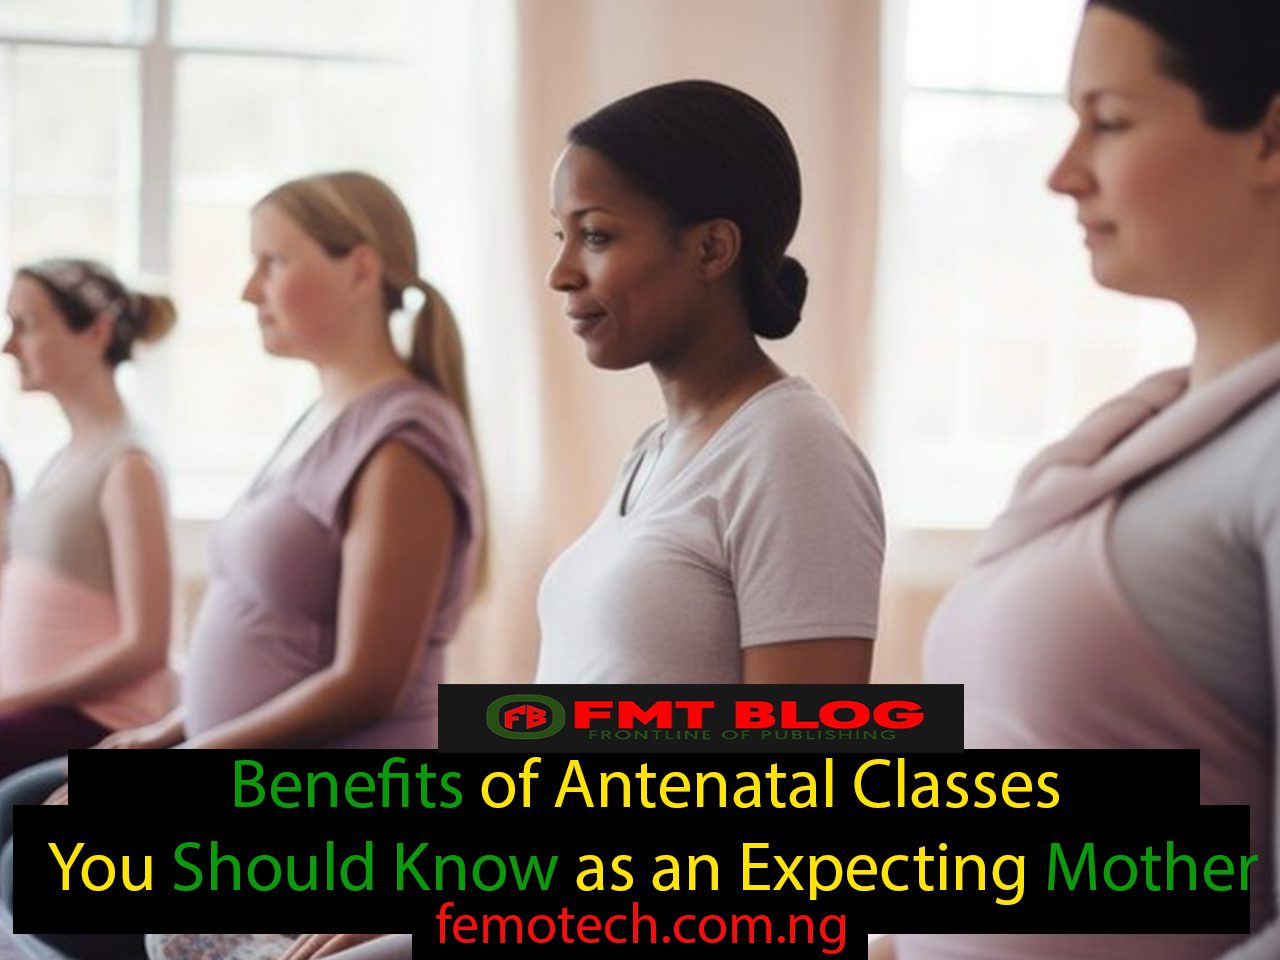 5 Benefits of Antenatal Classes You Should Know as an Expecting Mother